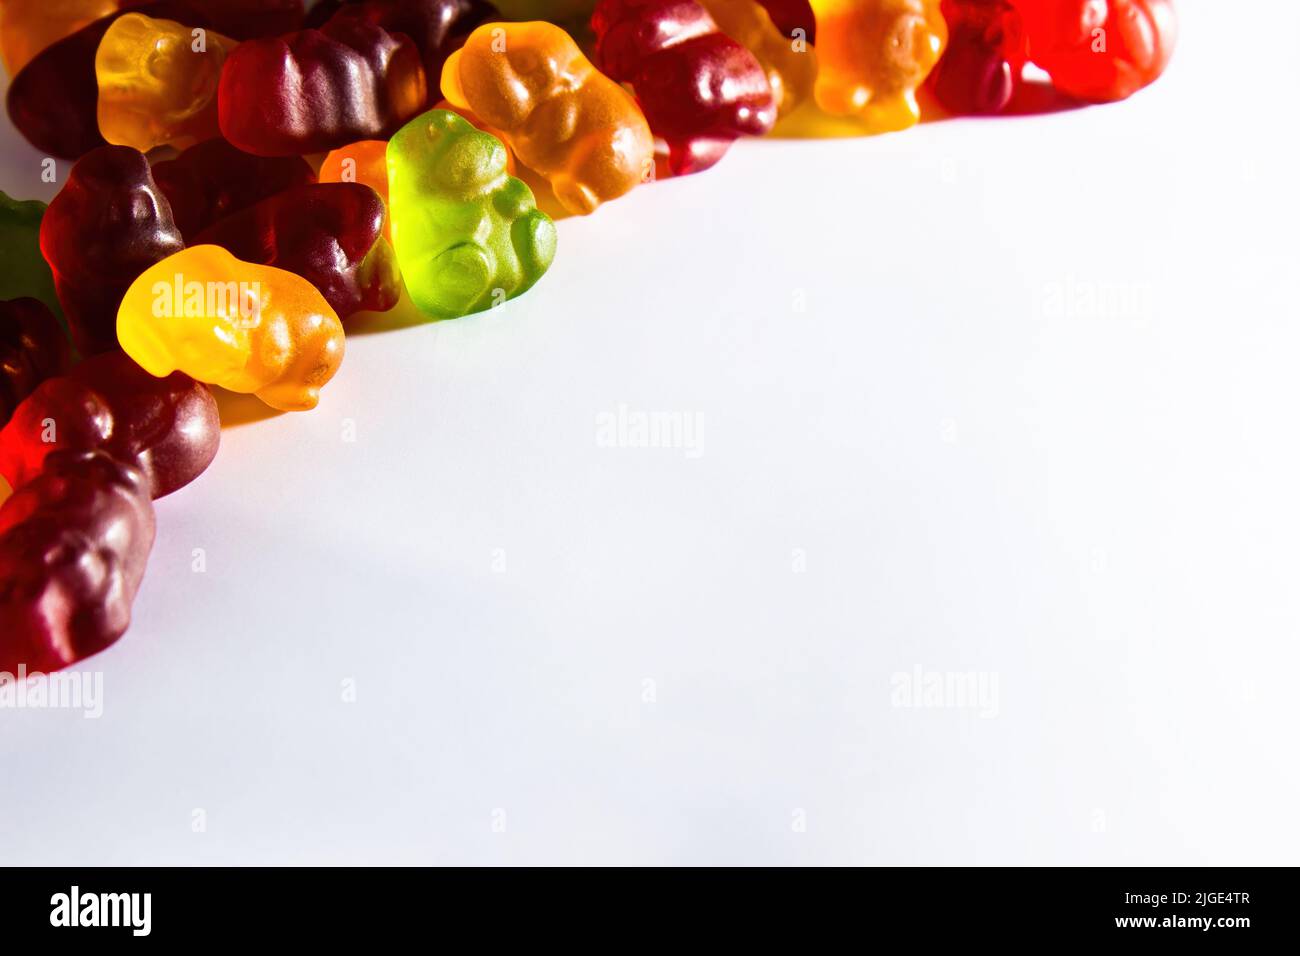 Gummy animals of different colors with fruit juice lie in the upper left corner of the frame on a white background Stock Photo